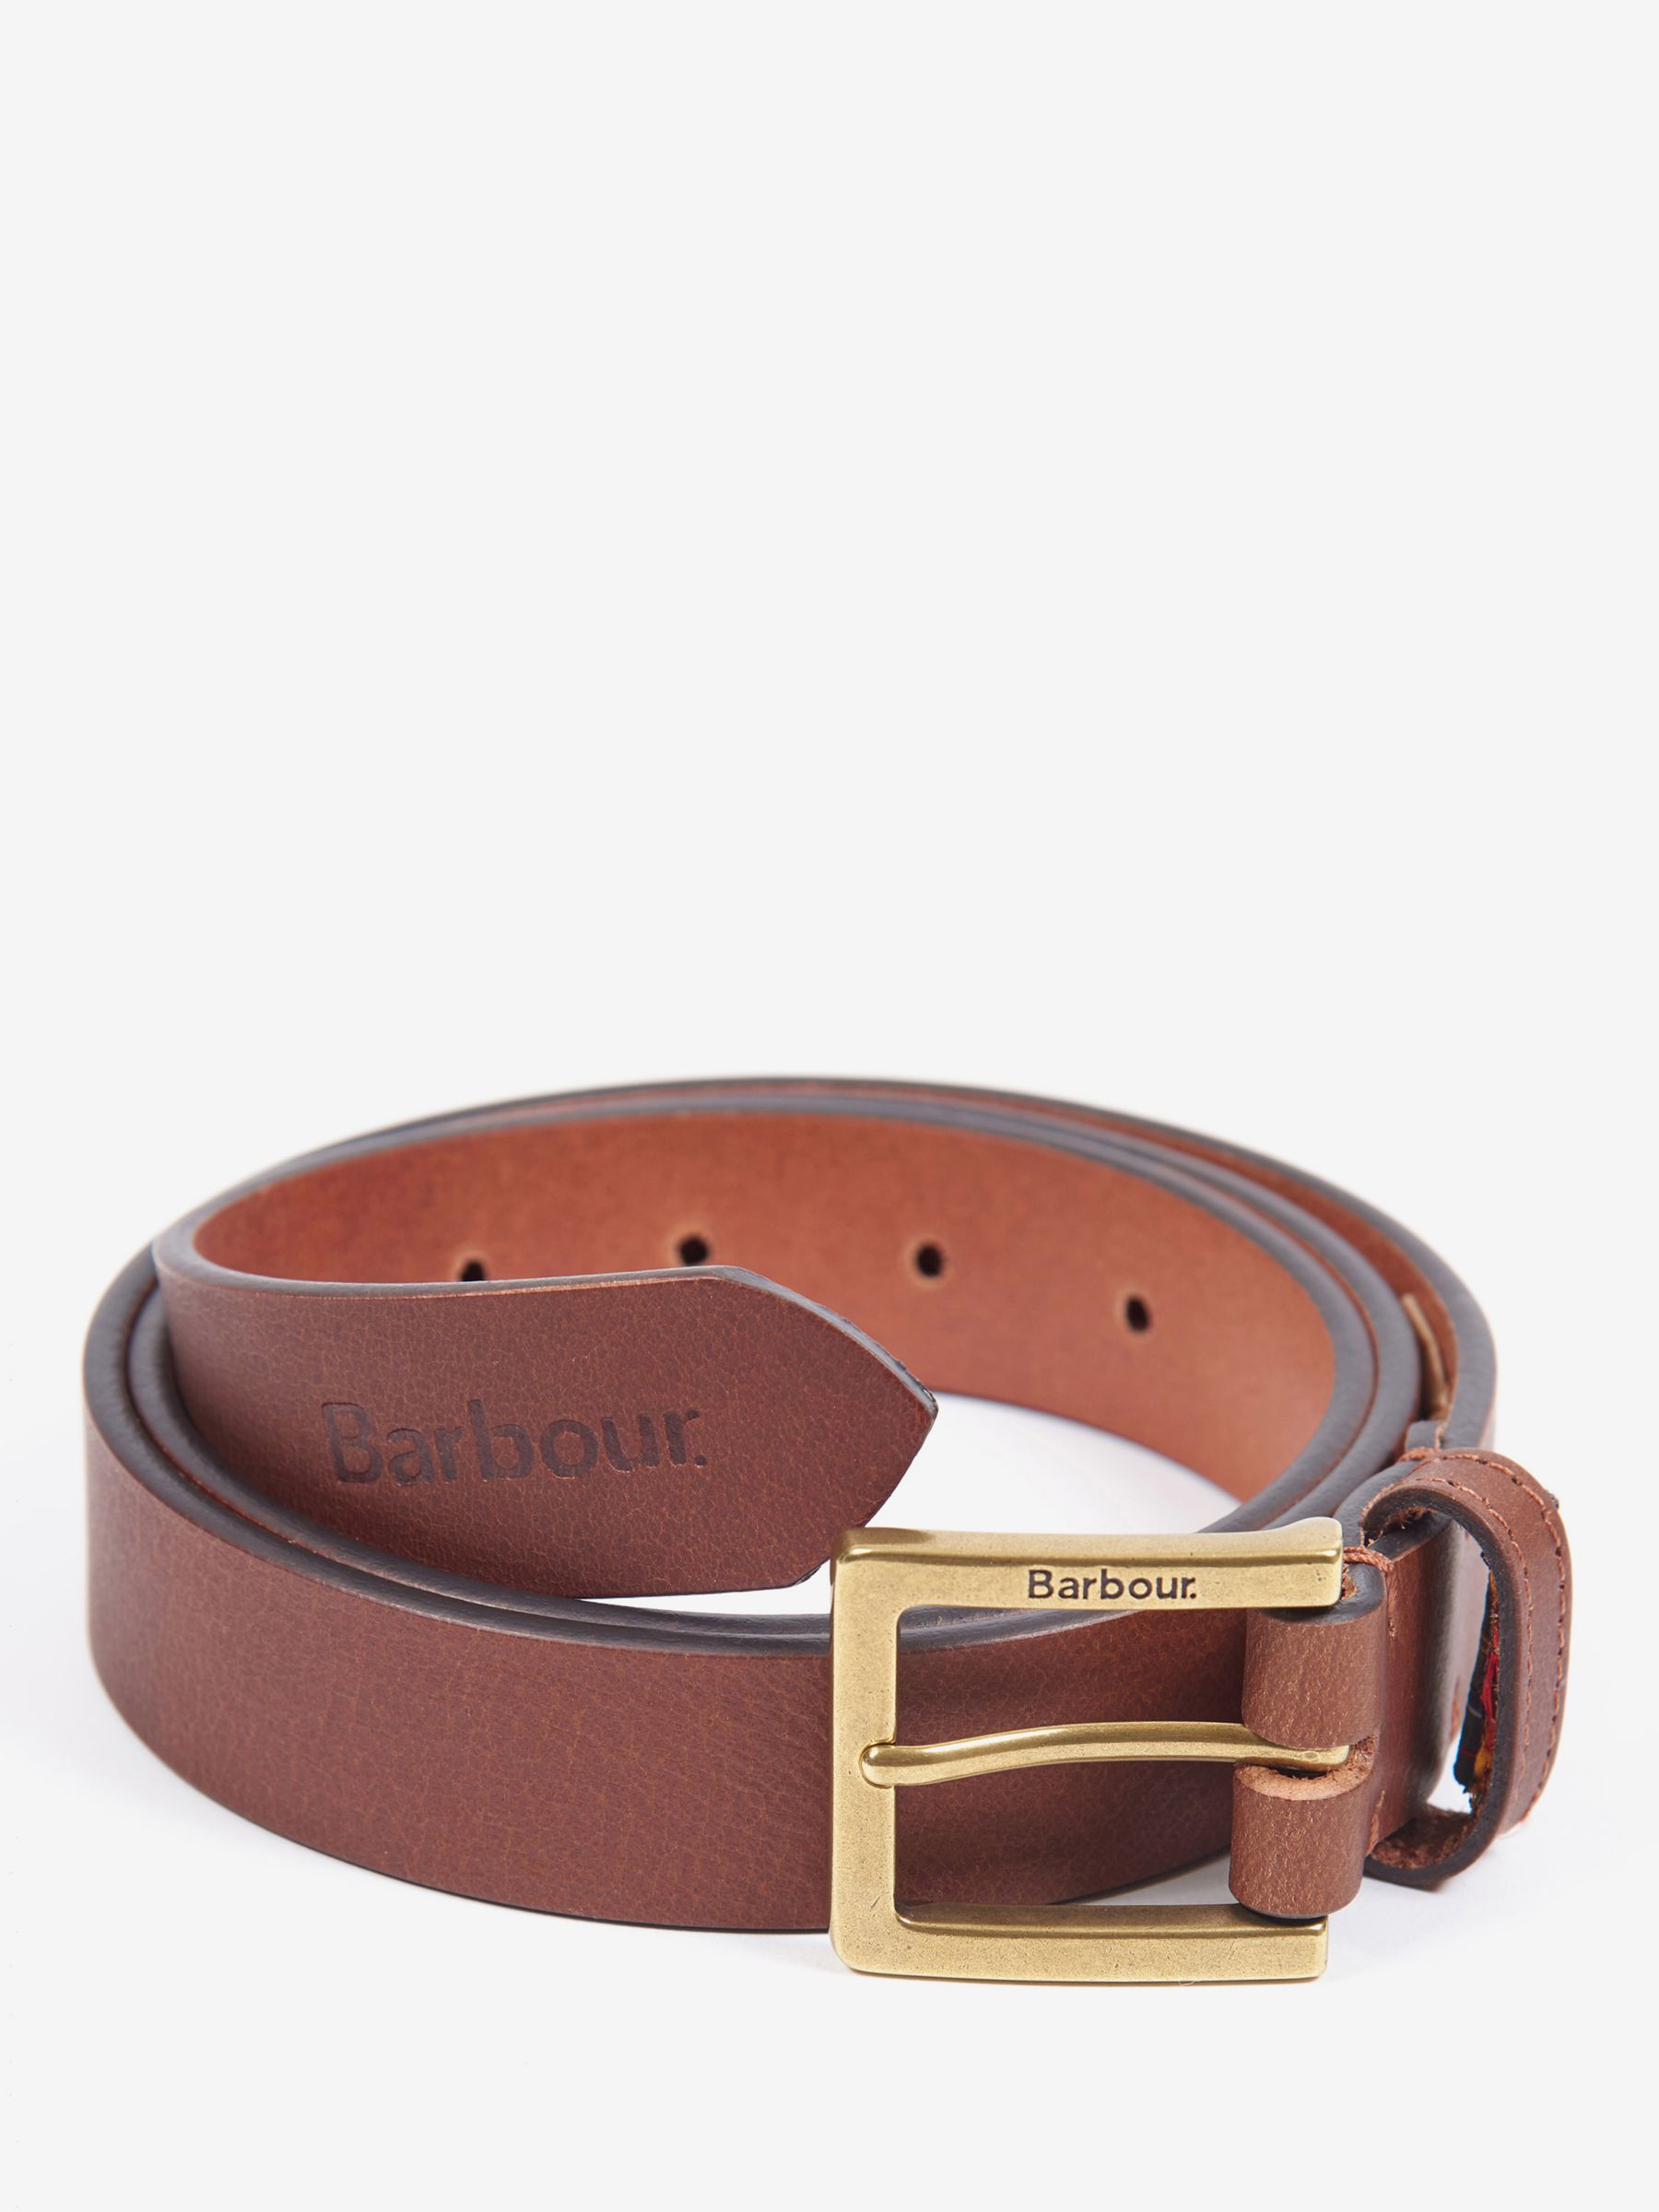 Barbour Wide Leather Belt, Brown at John Lewis & Partners